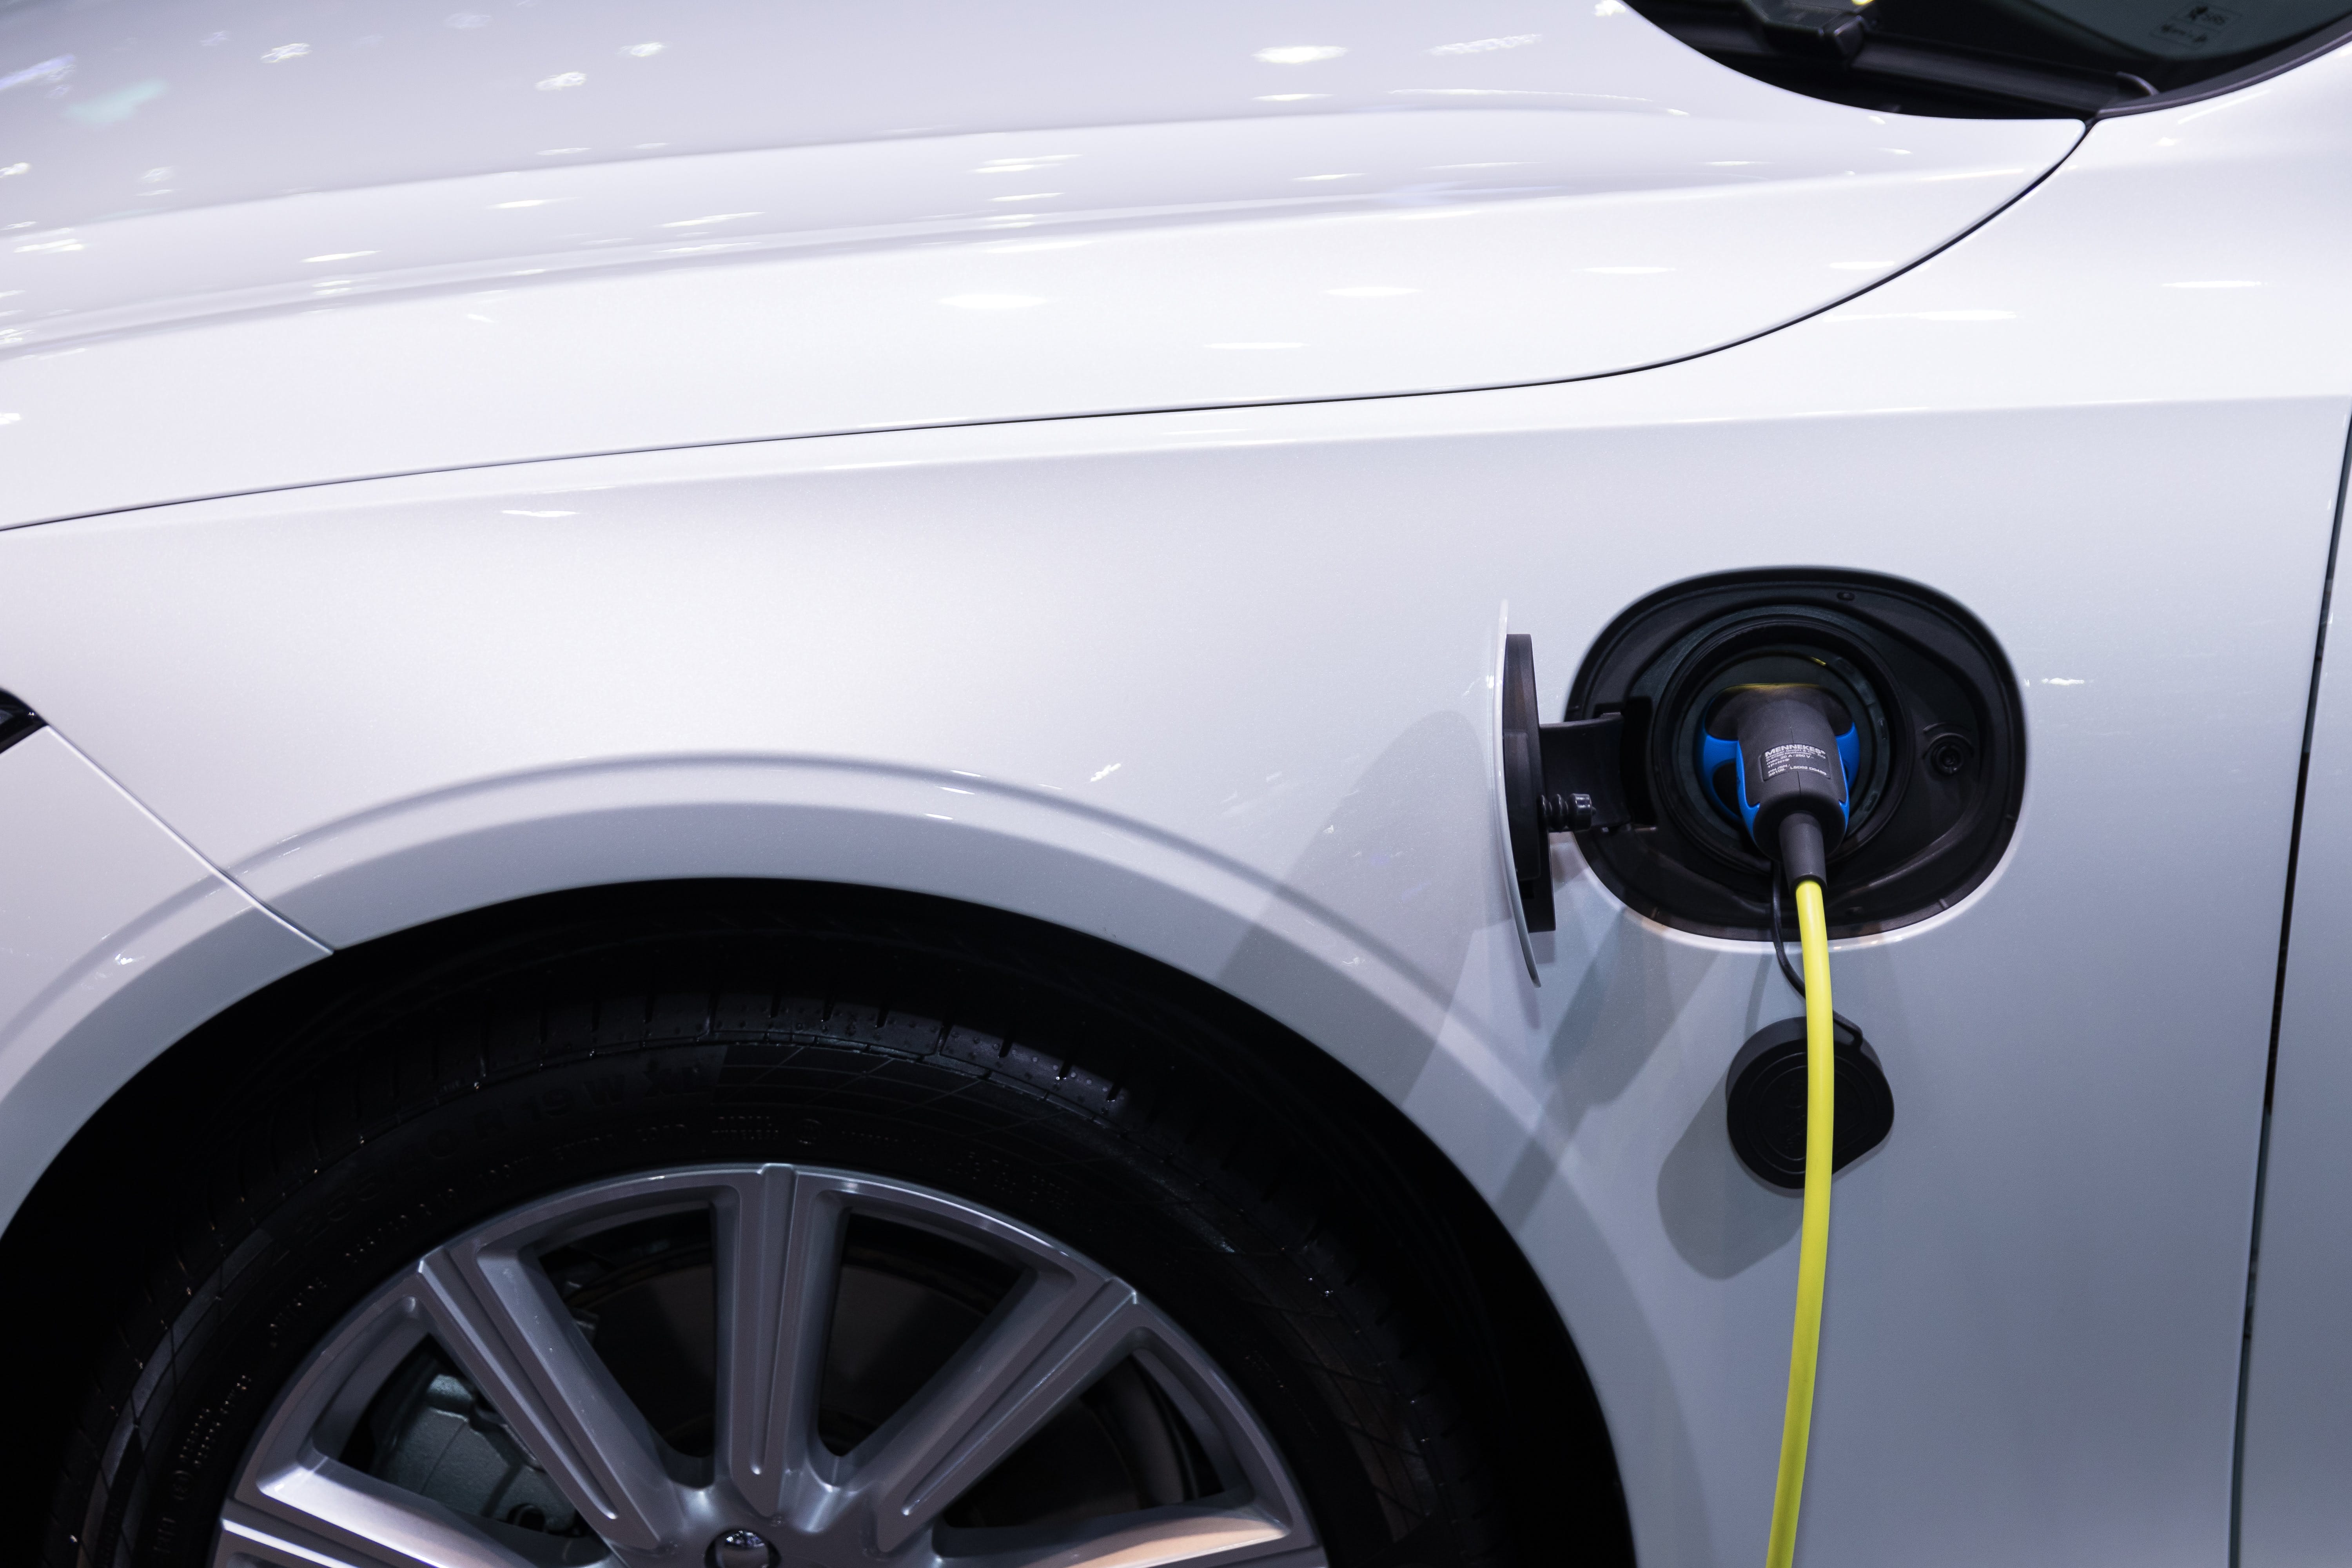 The white electric car has a charging cable on the side.